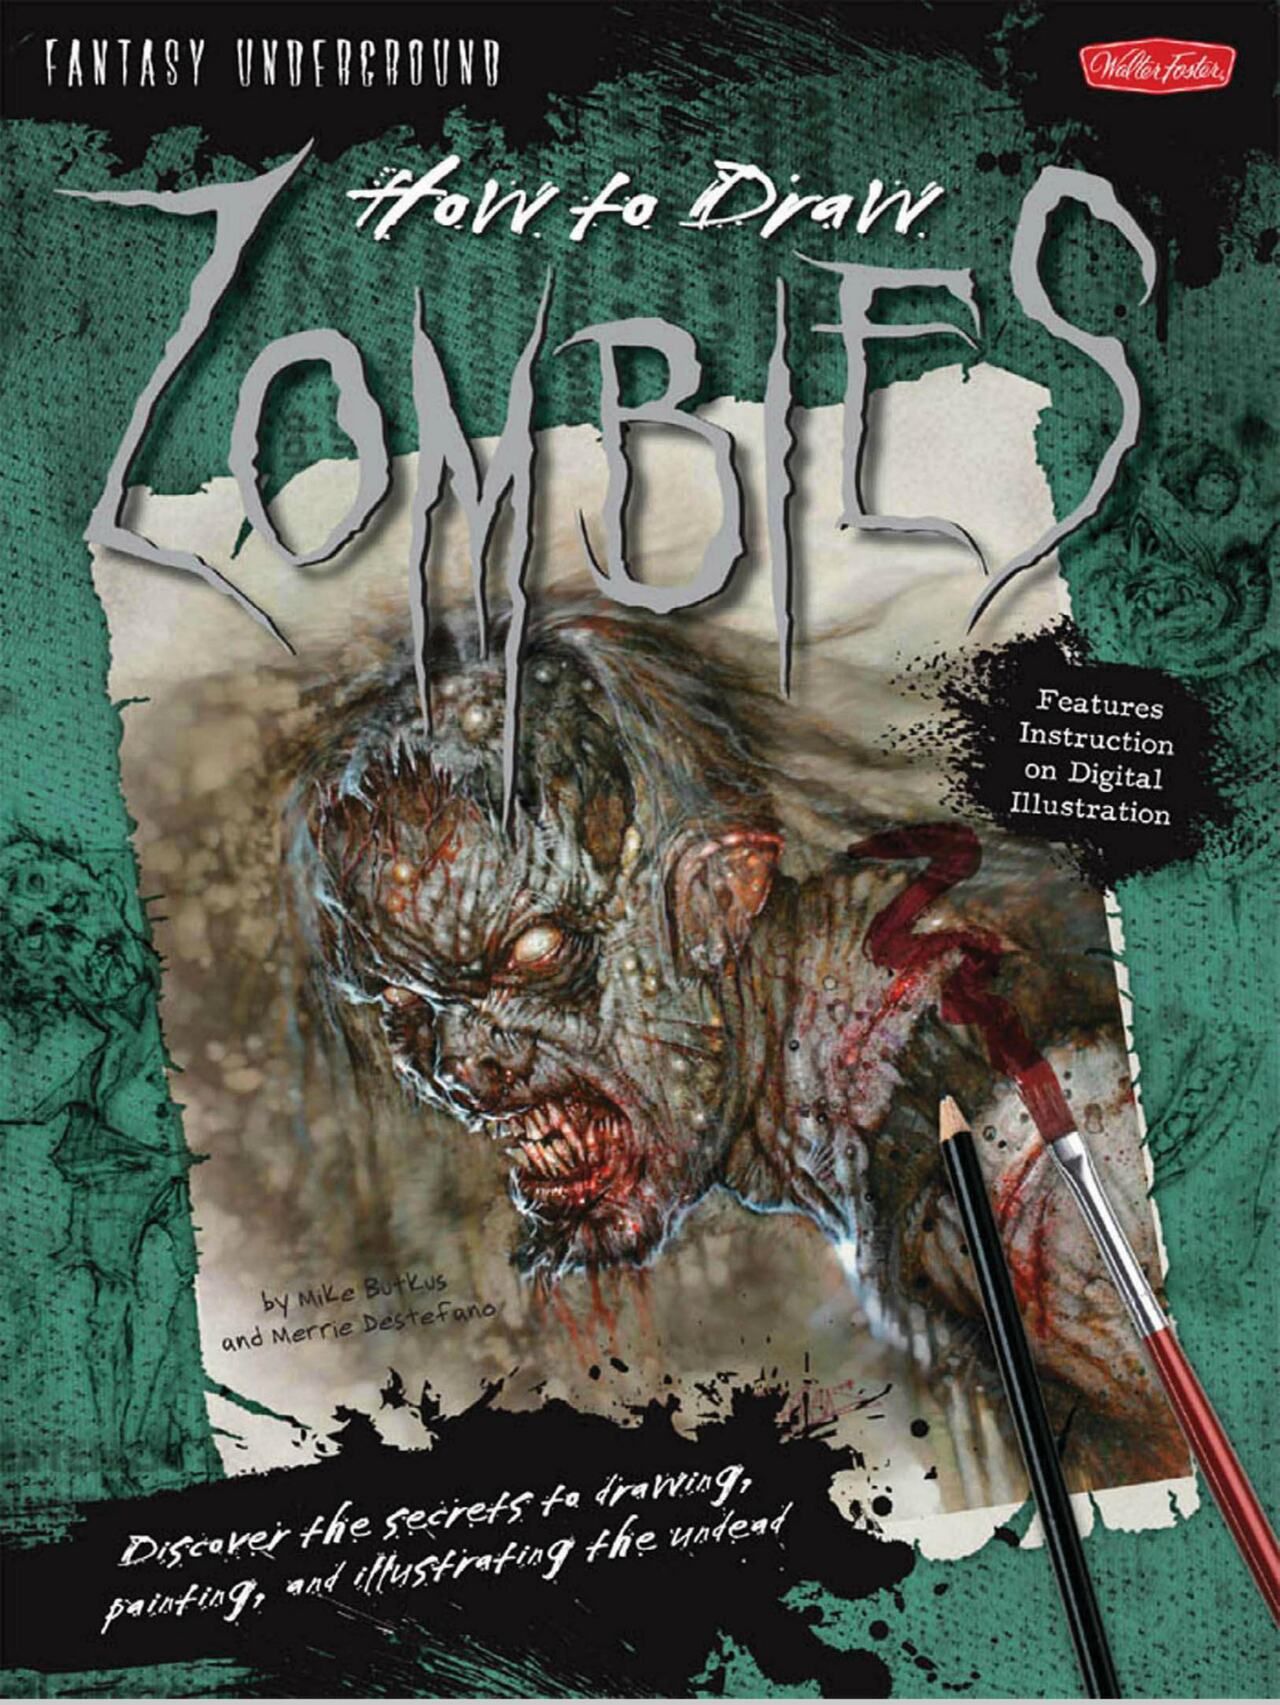 How to Draw Zombies: Discover the secrets to drawing, painting, and illustrating the undead 僵尸描绘集 1